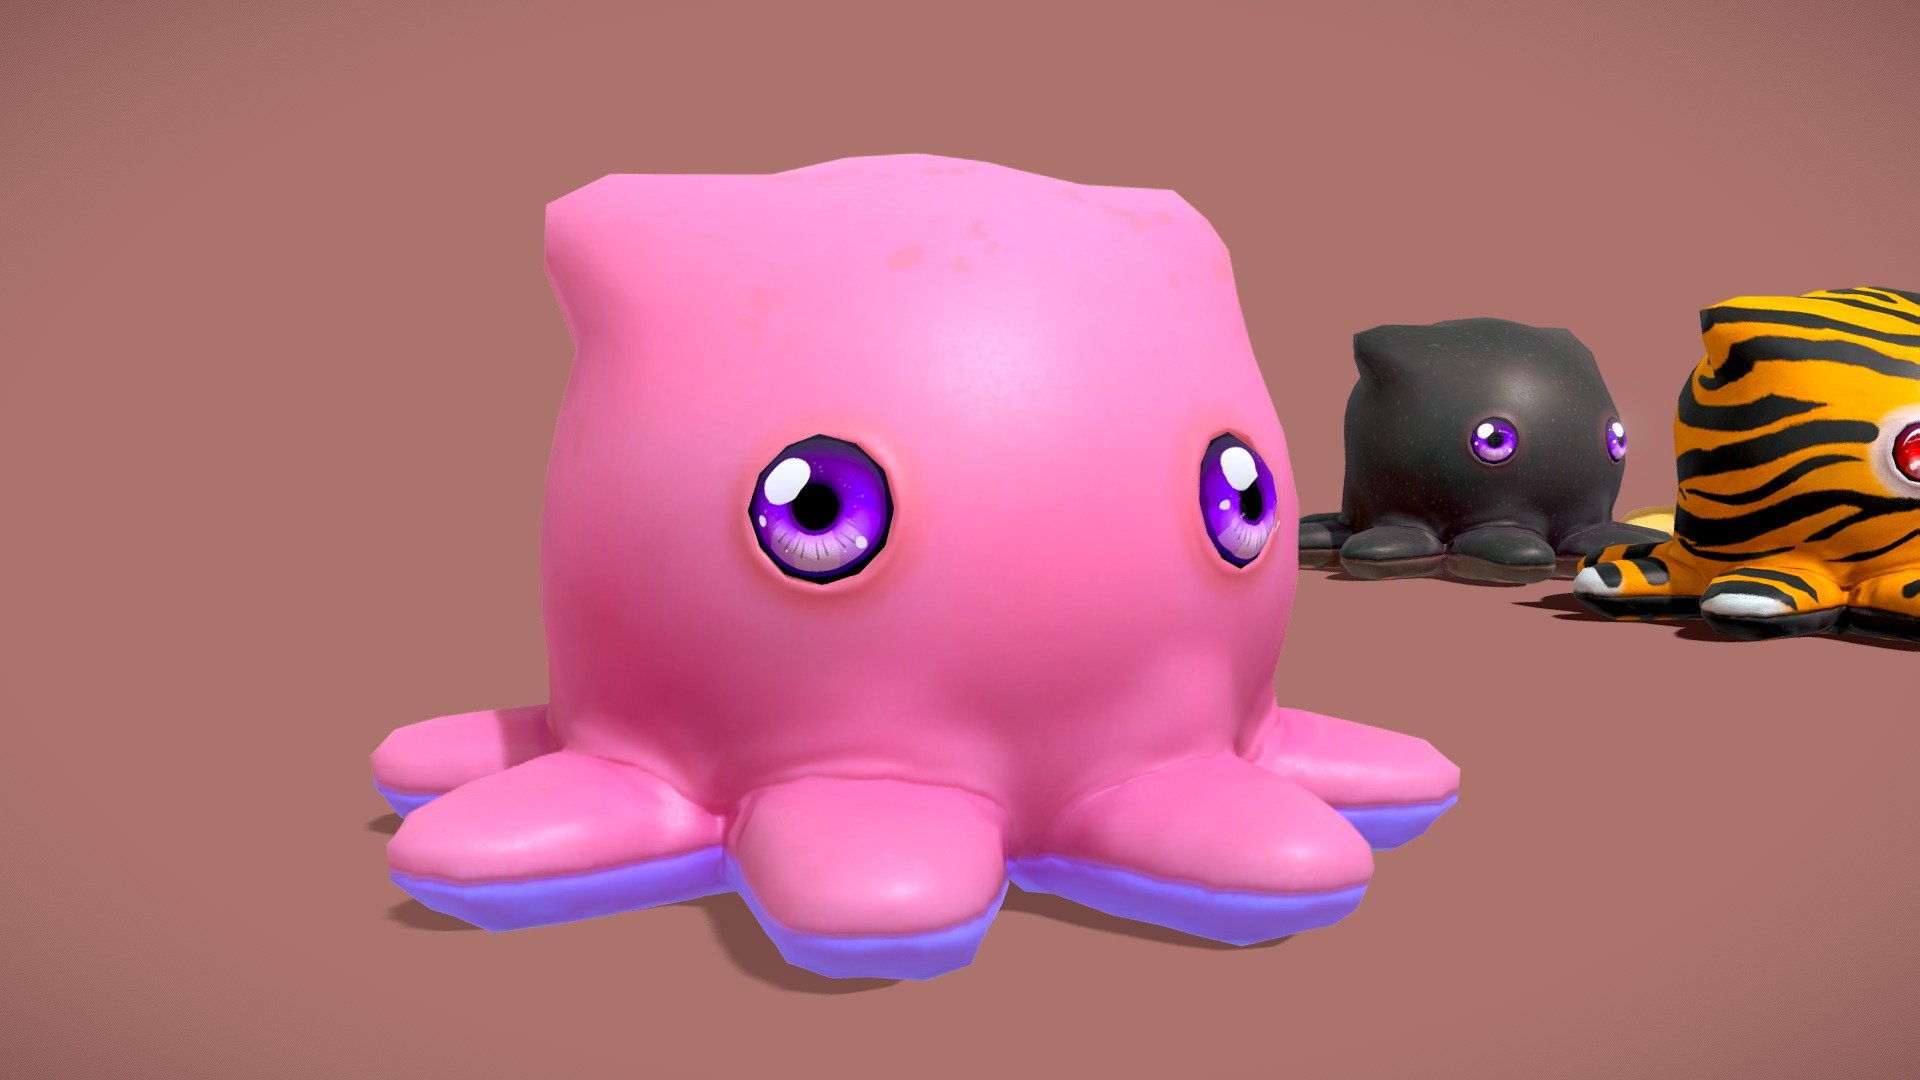 Cute low poly Octopuss with 14 animations for your game project!

Get 2 more rigged Model Variations for a lower price!: Octopuss Collection

Included files:





1 rigged Octopuss and a cat-ear version. Triangle count: 2616




1 rigged transparent Octopuss variation. Triangle count: 7286




14 Animations (many locomotion, idle, attack, death animations)




9 Eye variations and 11 color variations




Maps (2048x2048 PNG): basecolor, metal, roughness, normal, opacity, emission. Seperate Shaders for body and eyes.




Tutorials on Shader setup for eyes and body




Unity/Unreal: optional Channel packed textures for each engine. All movement-animations come with a &ldquo;no-root-motion